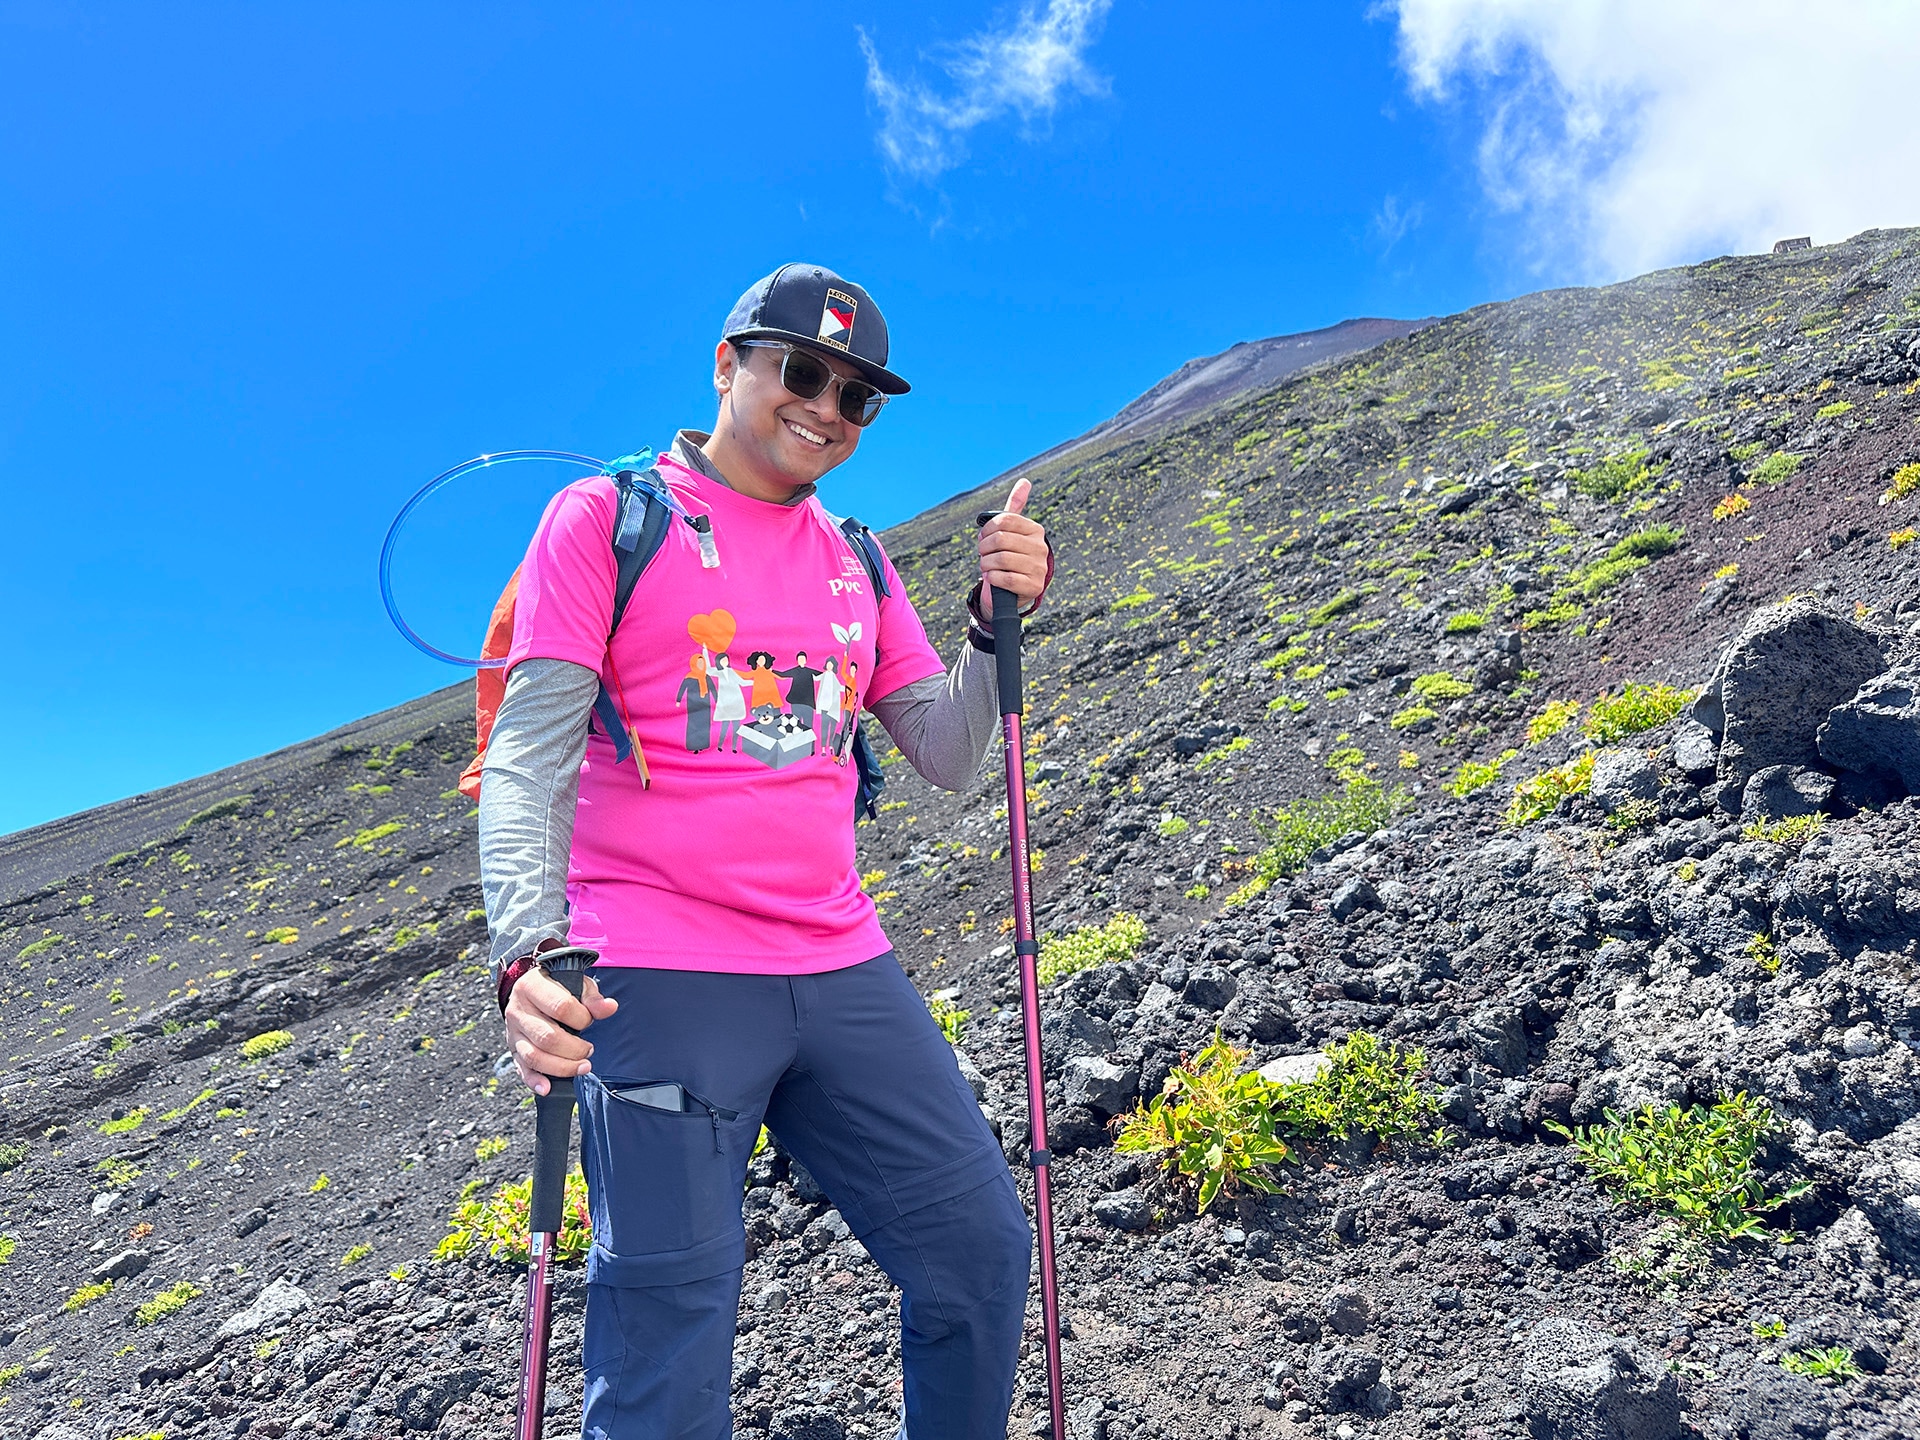 Scaling Mount Fuji: A special hike for a special cause